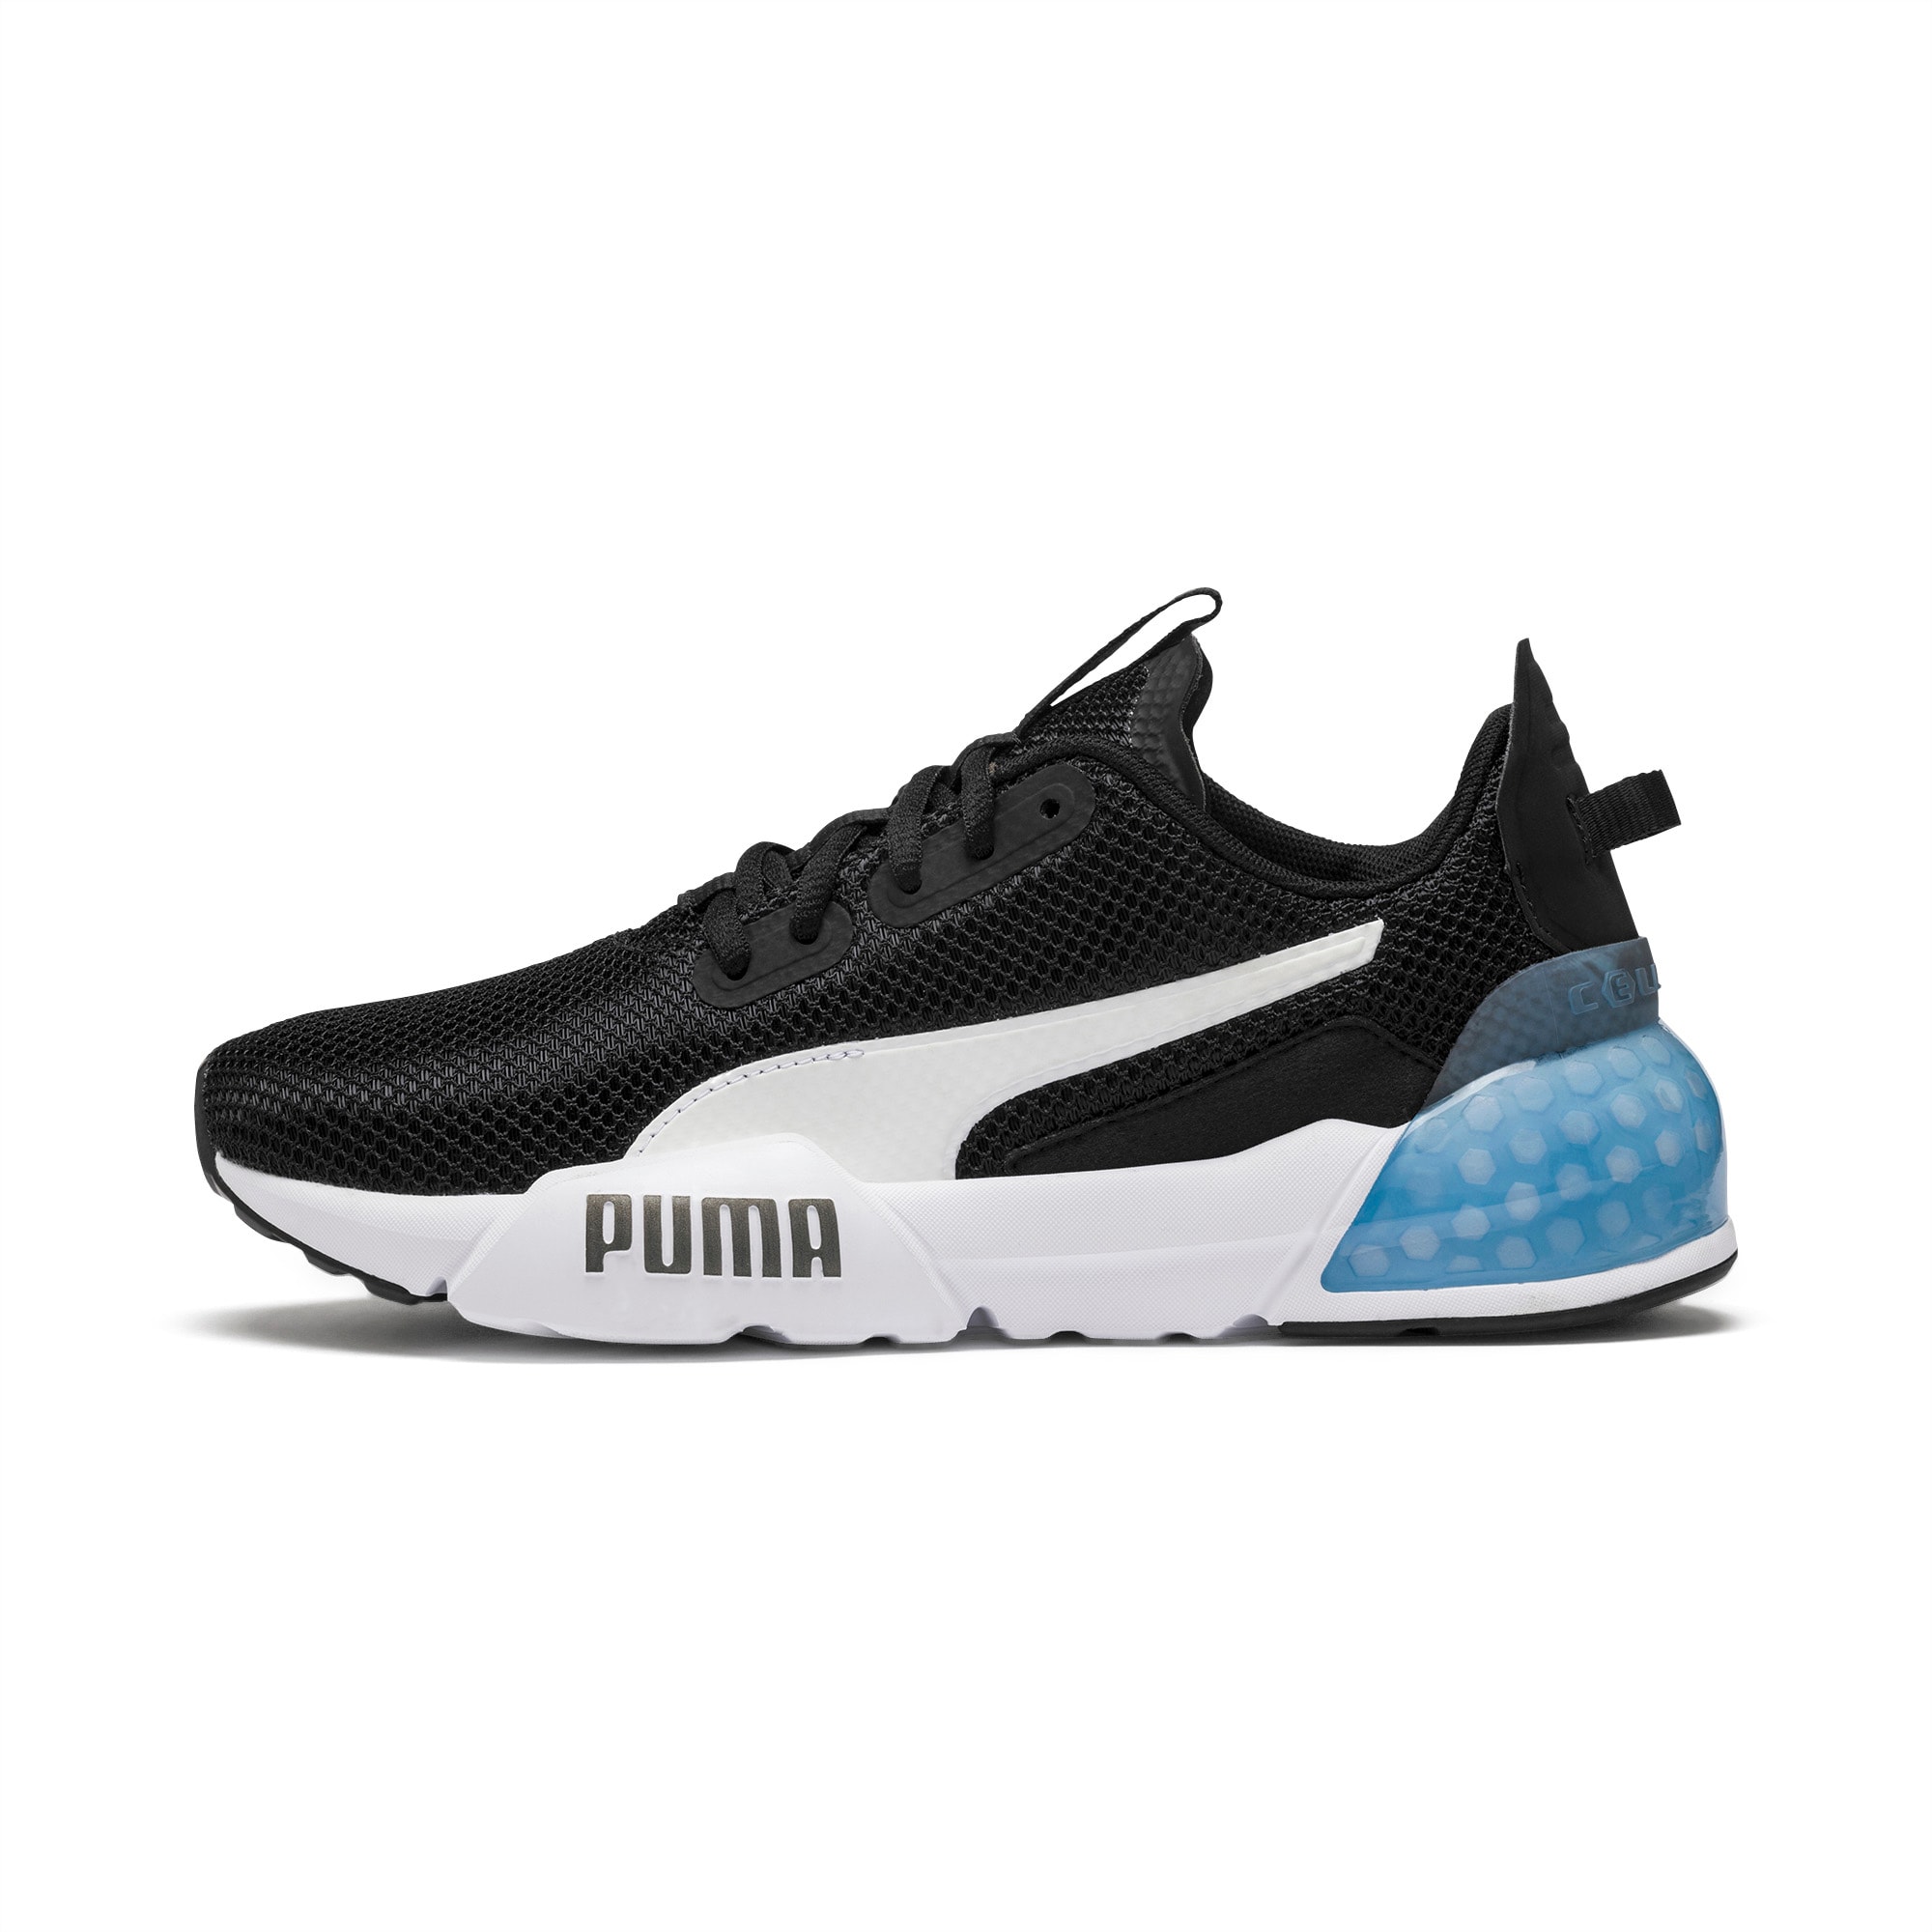 CELL Phase Women's Training Shoes | PUMA